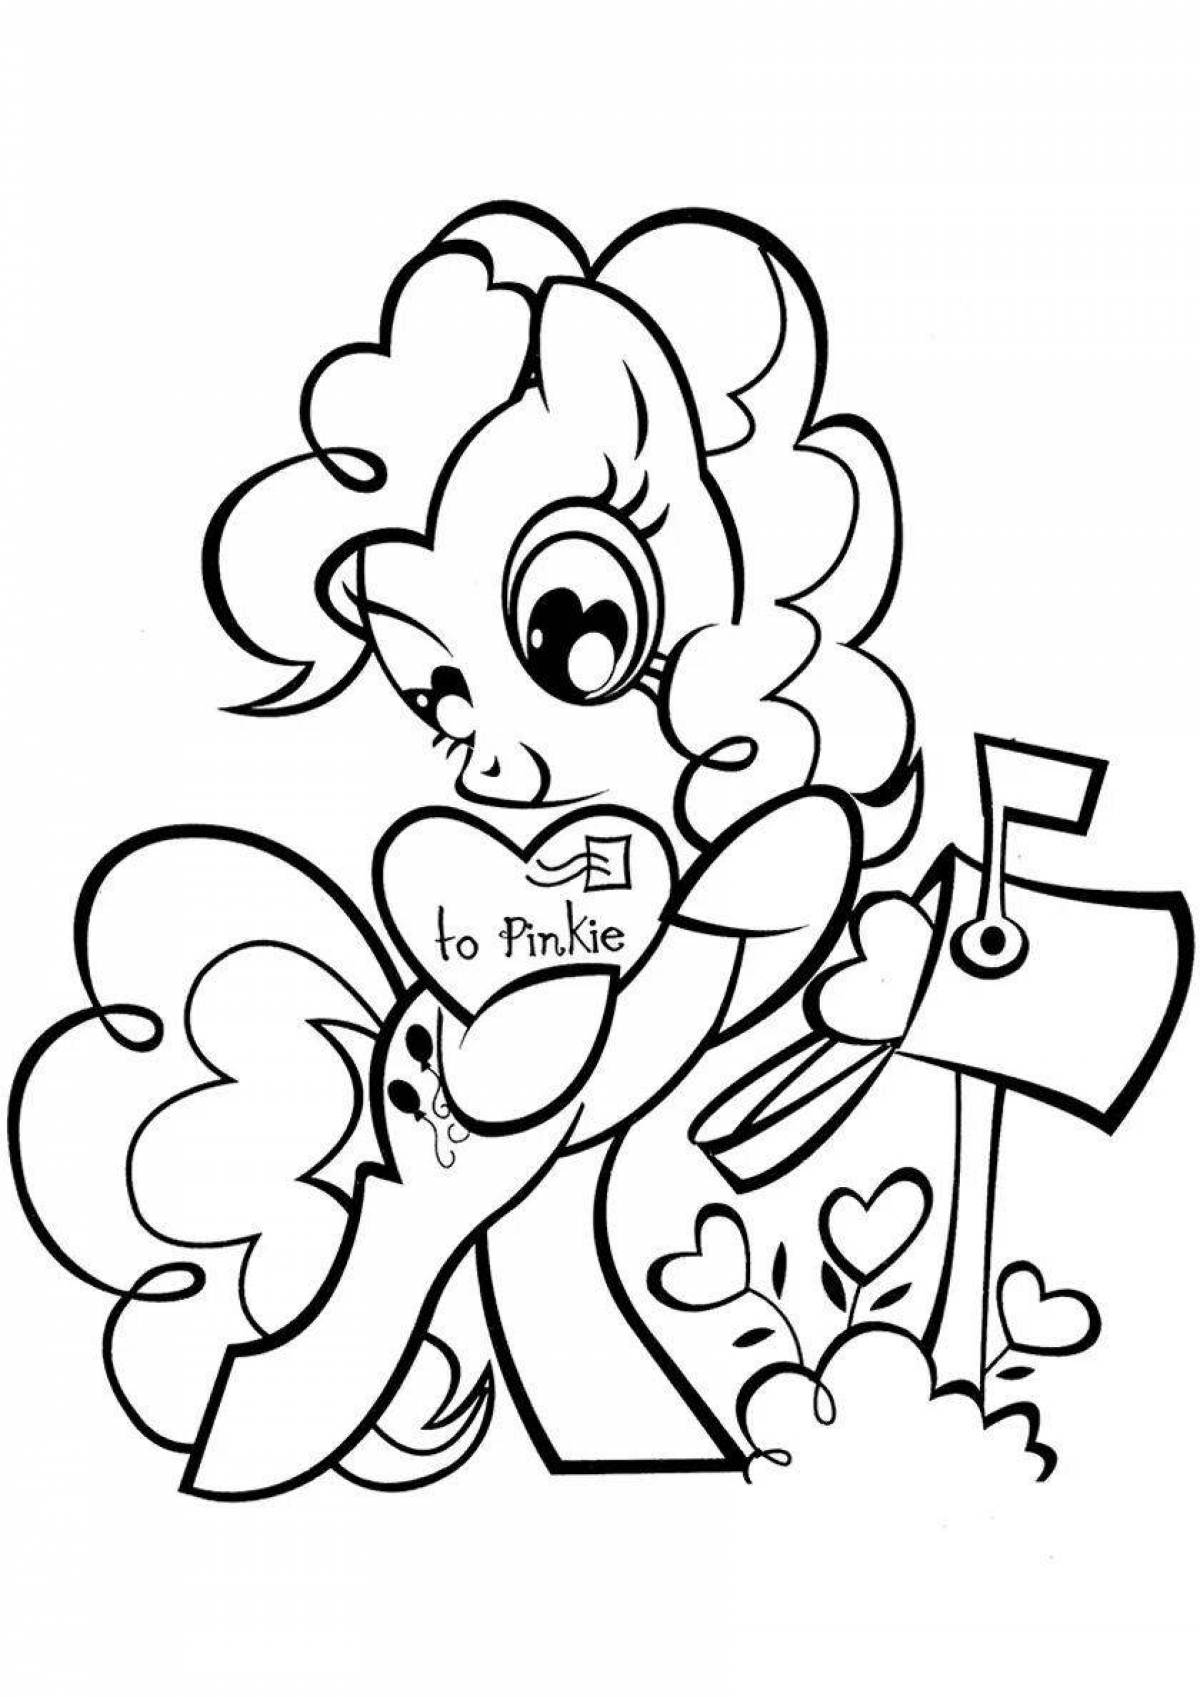 Exquisite pinkie pie coloring book for girls